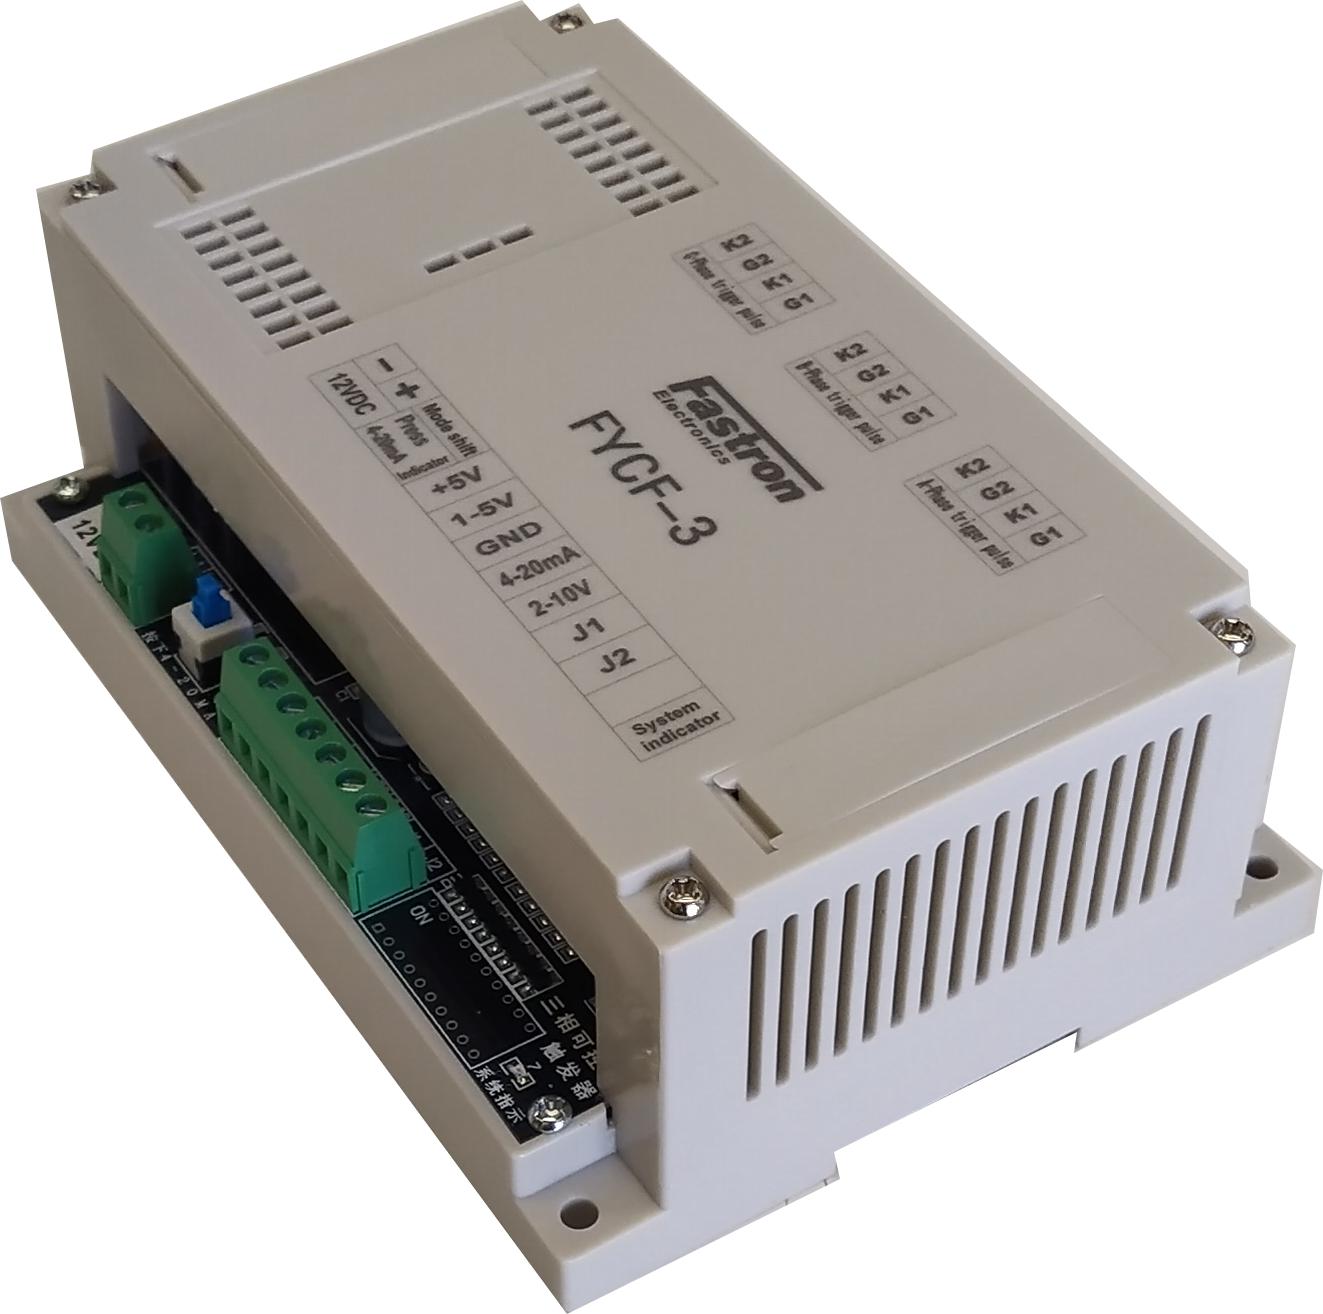 FYCF-3R, Three Phase Voltage Control SCR Trigger Module with Soft Start Function, 4-20mA,2-10V,1-5V,5K POT Input, 200-450VAC, 12VDC Aux Supply